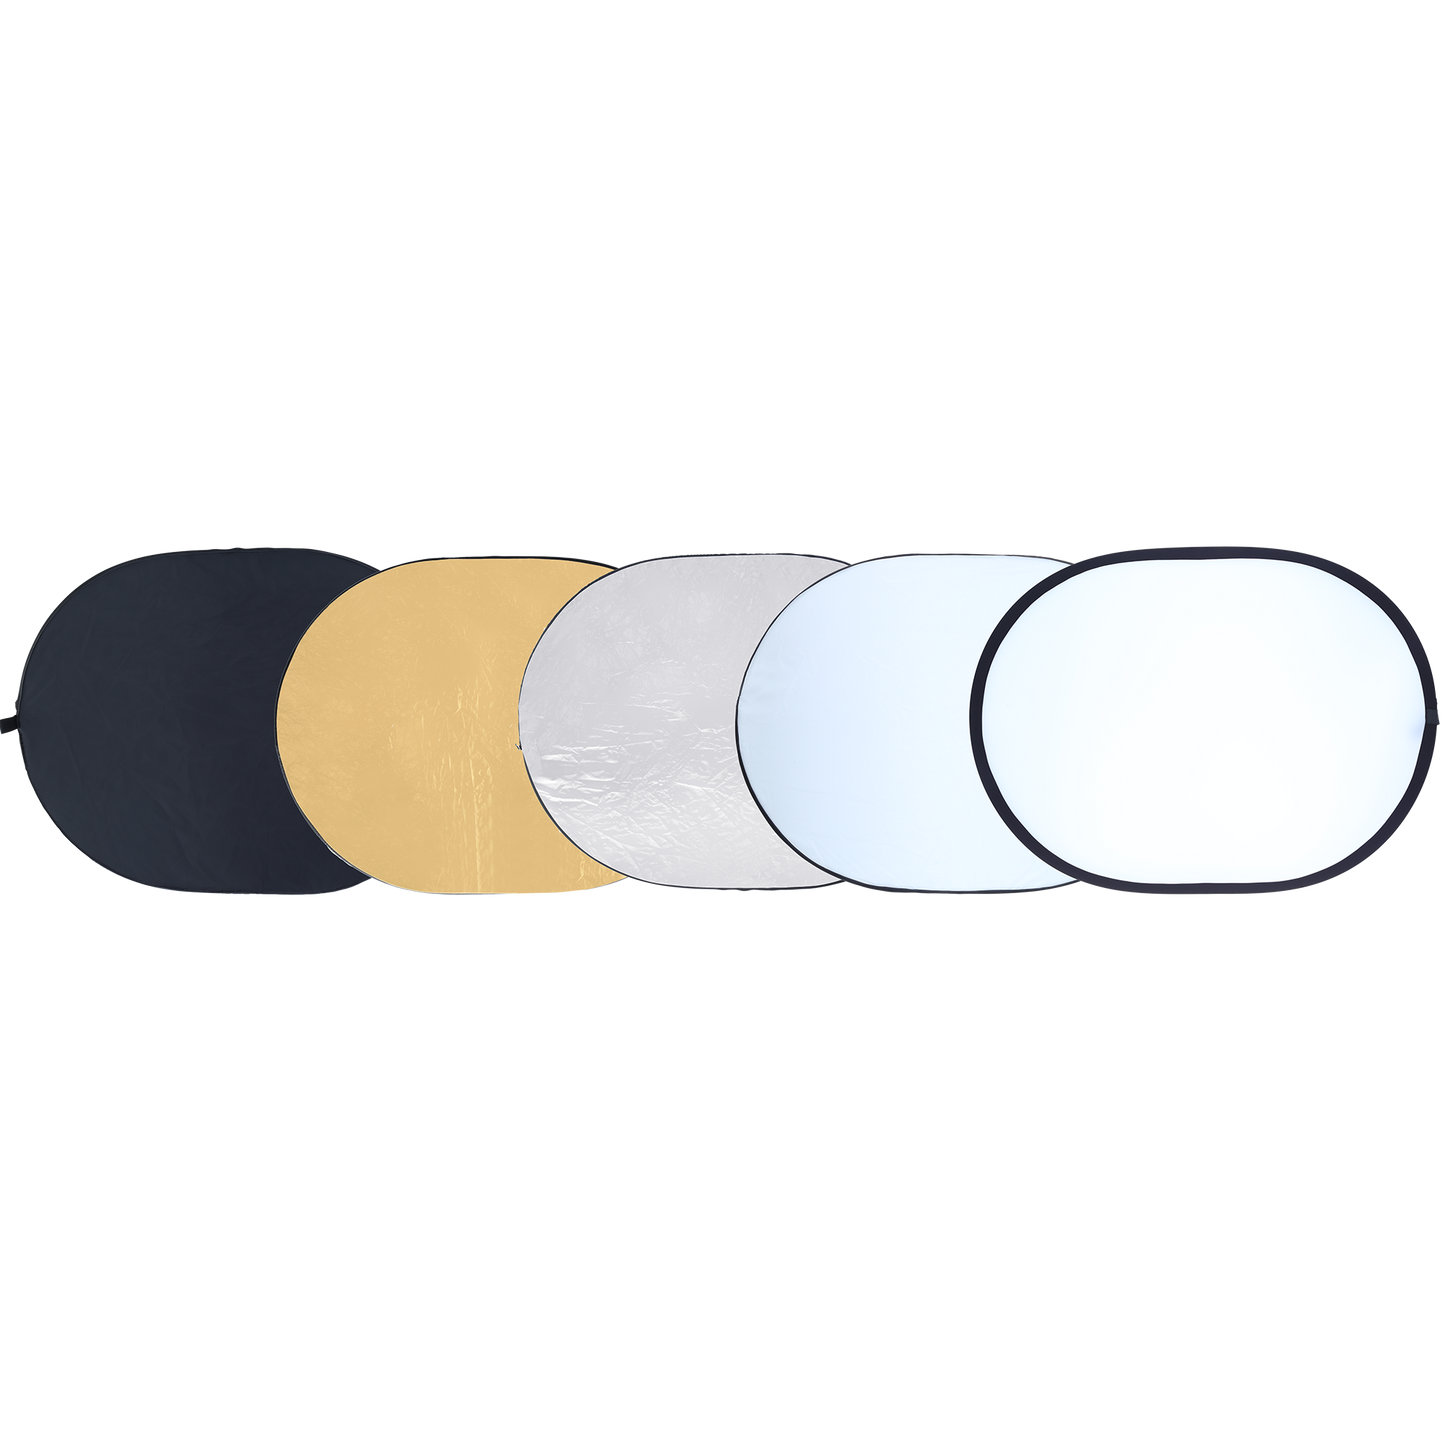 Professional 5 in 1 folding reflector